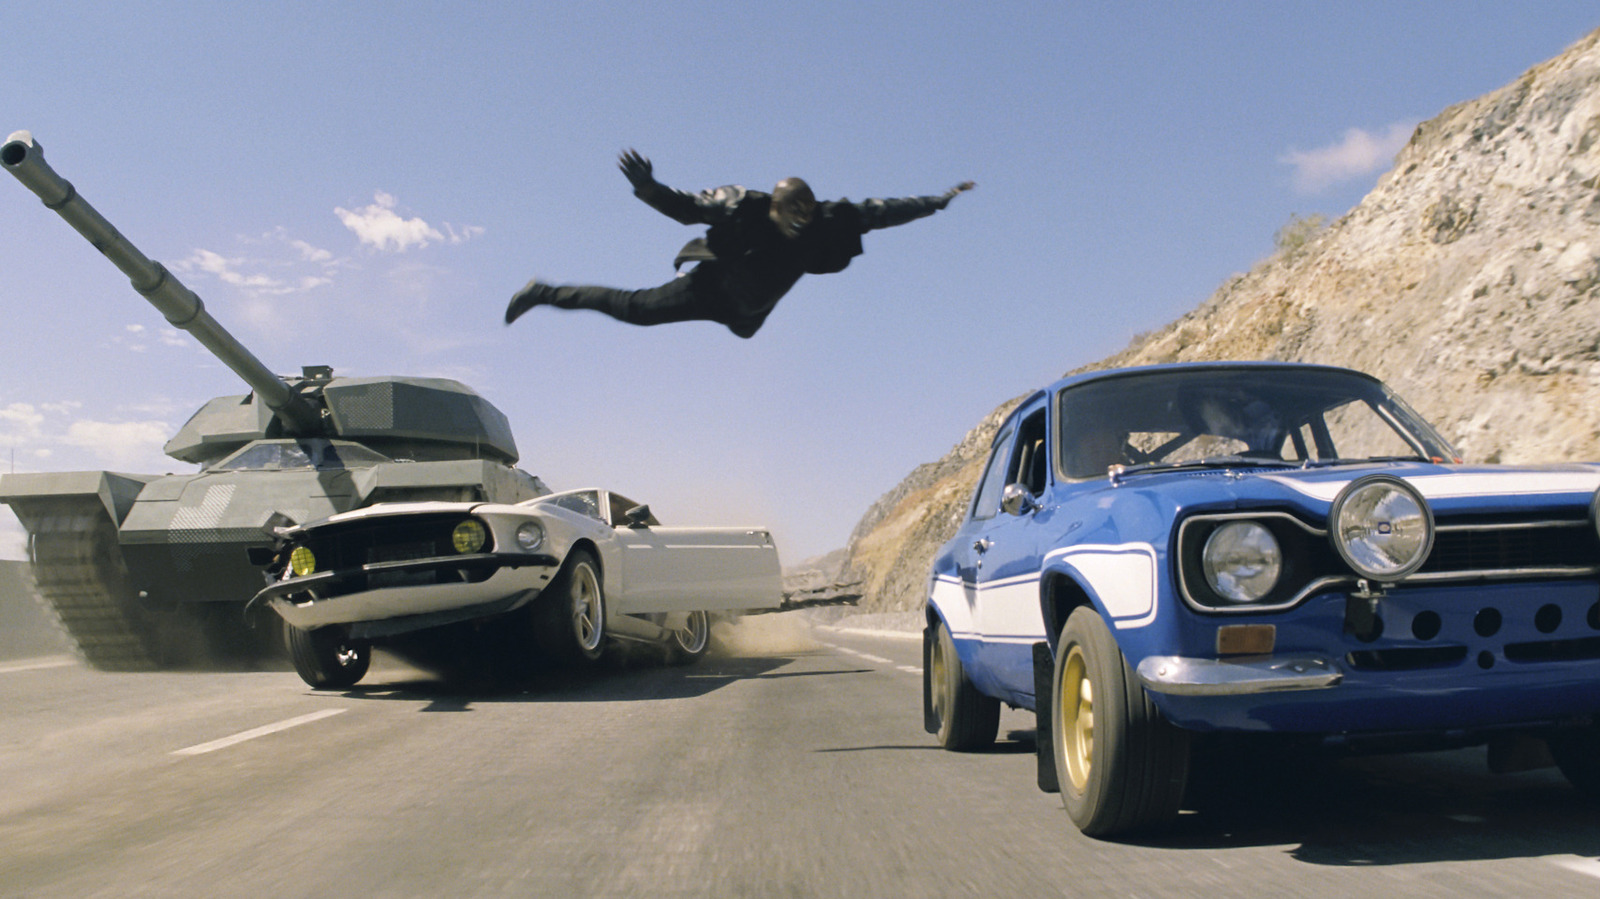 The Tank Attack In Fast & Furious 6 Is The Best Action Scene Ever